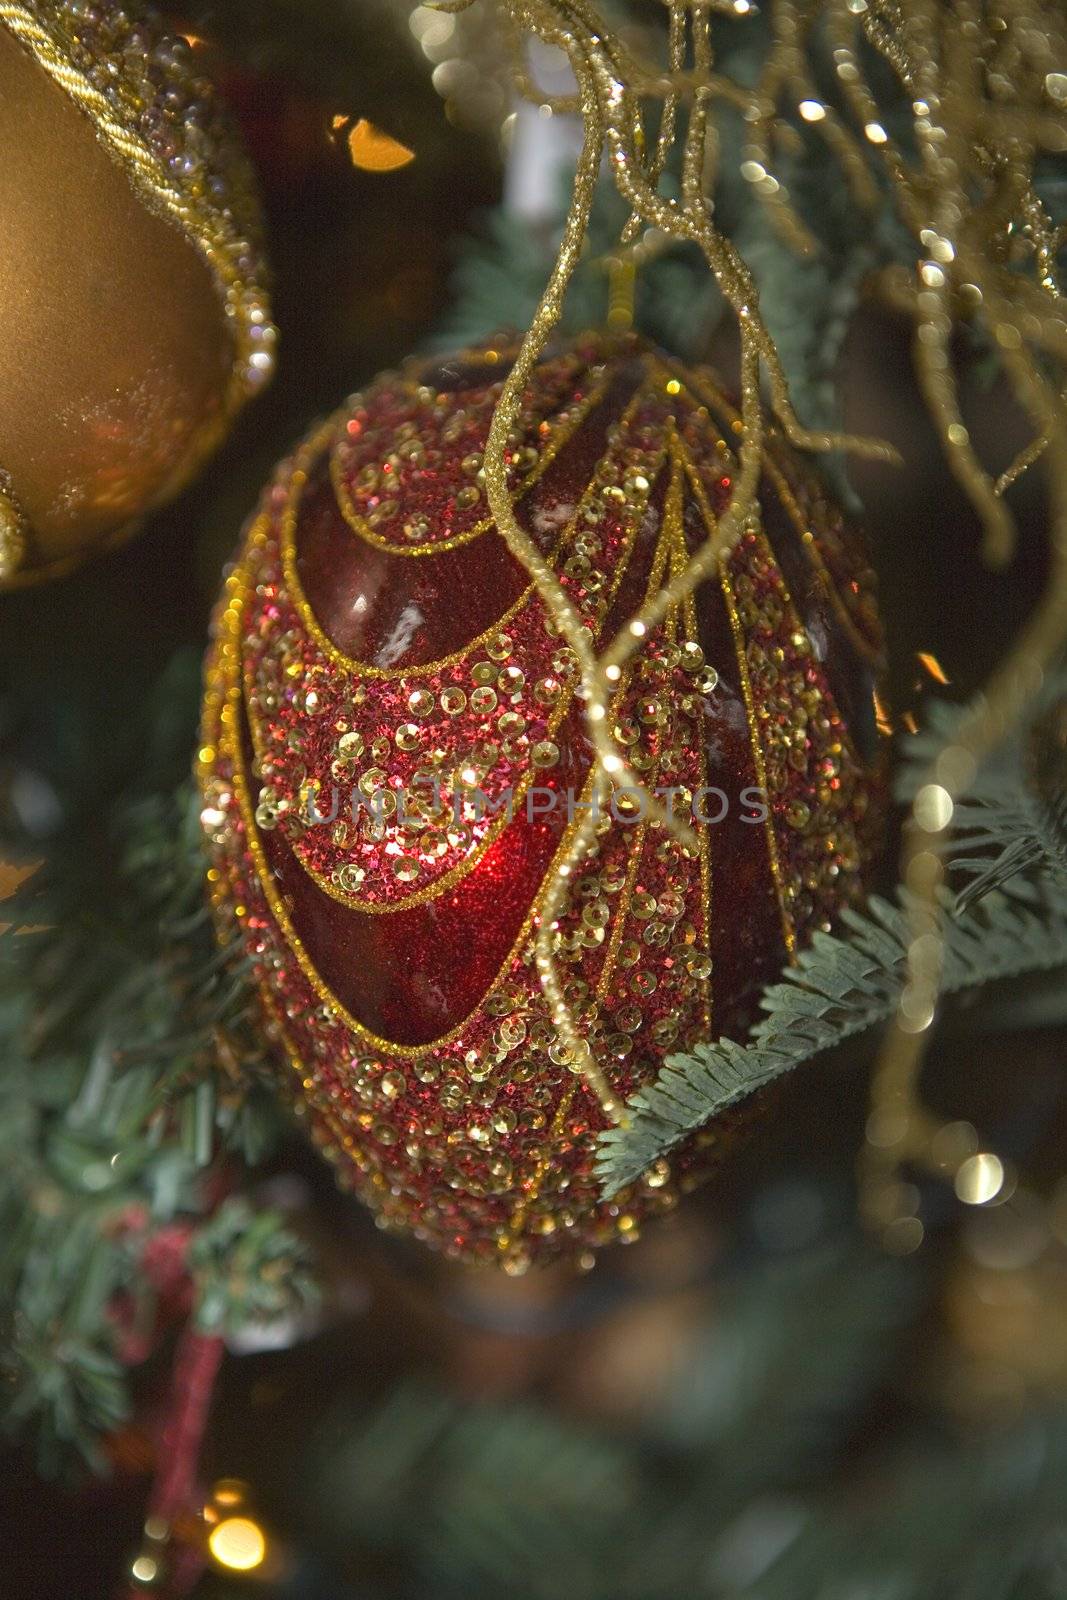 Christmas Ornament on a Tree during the Holiday season.